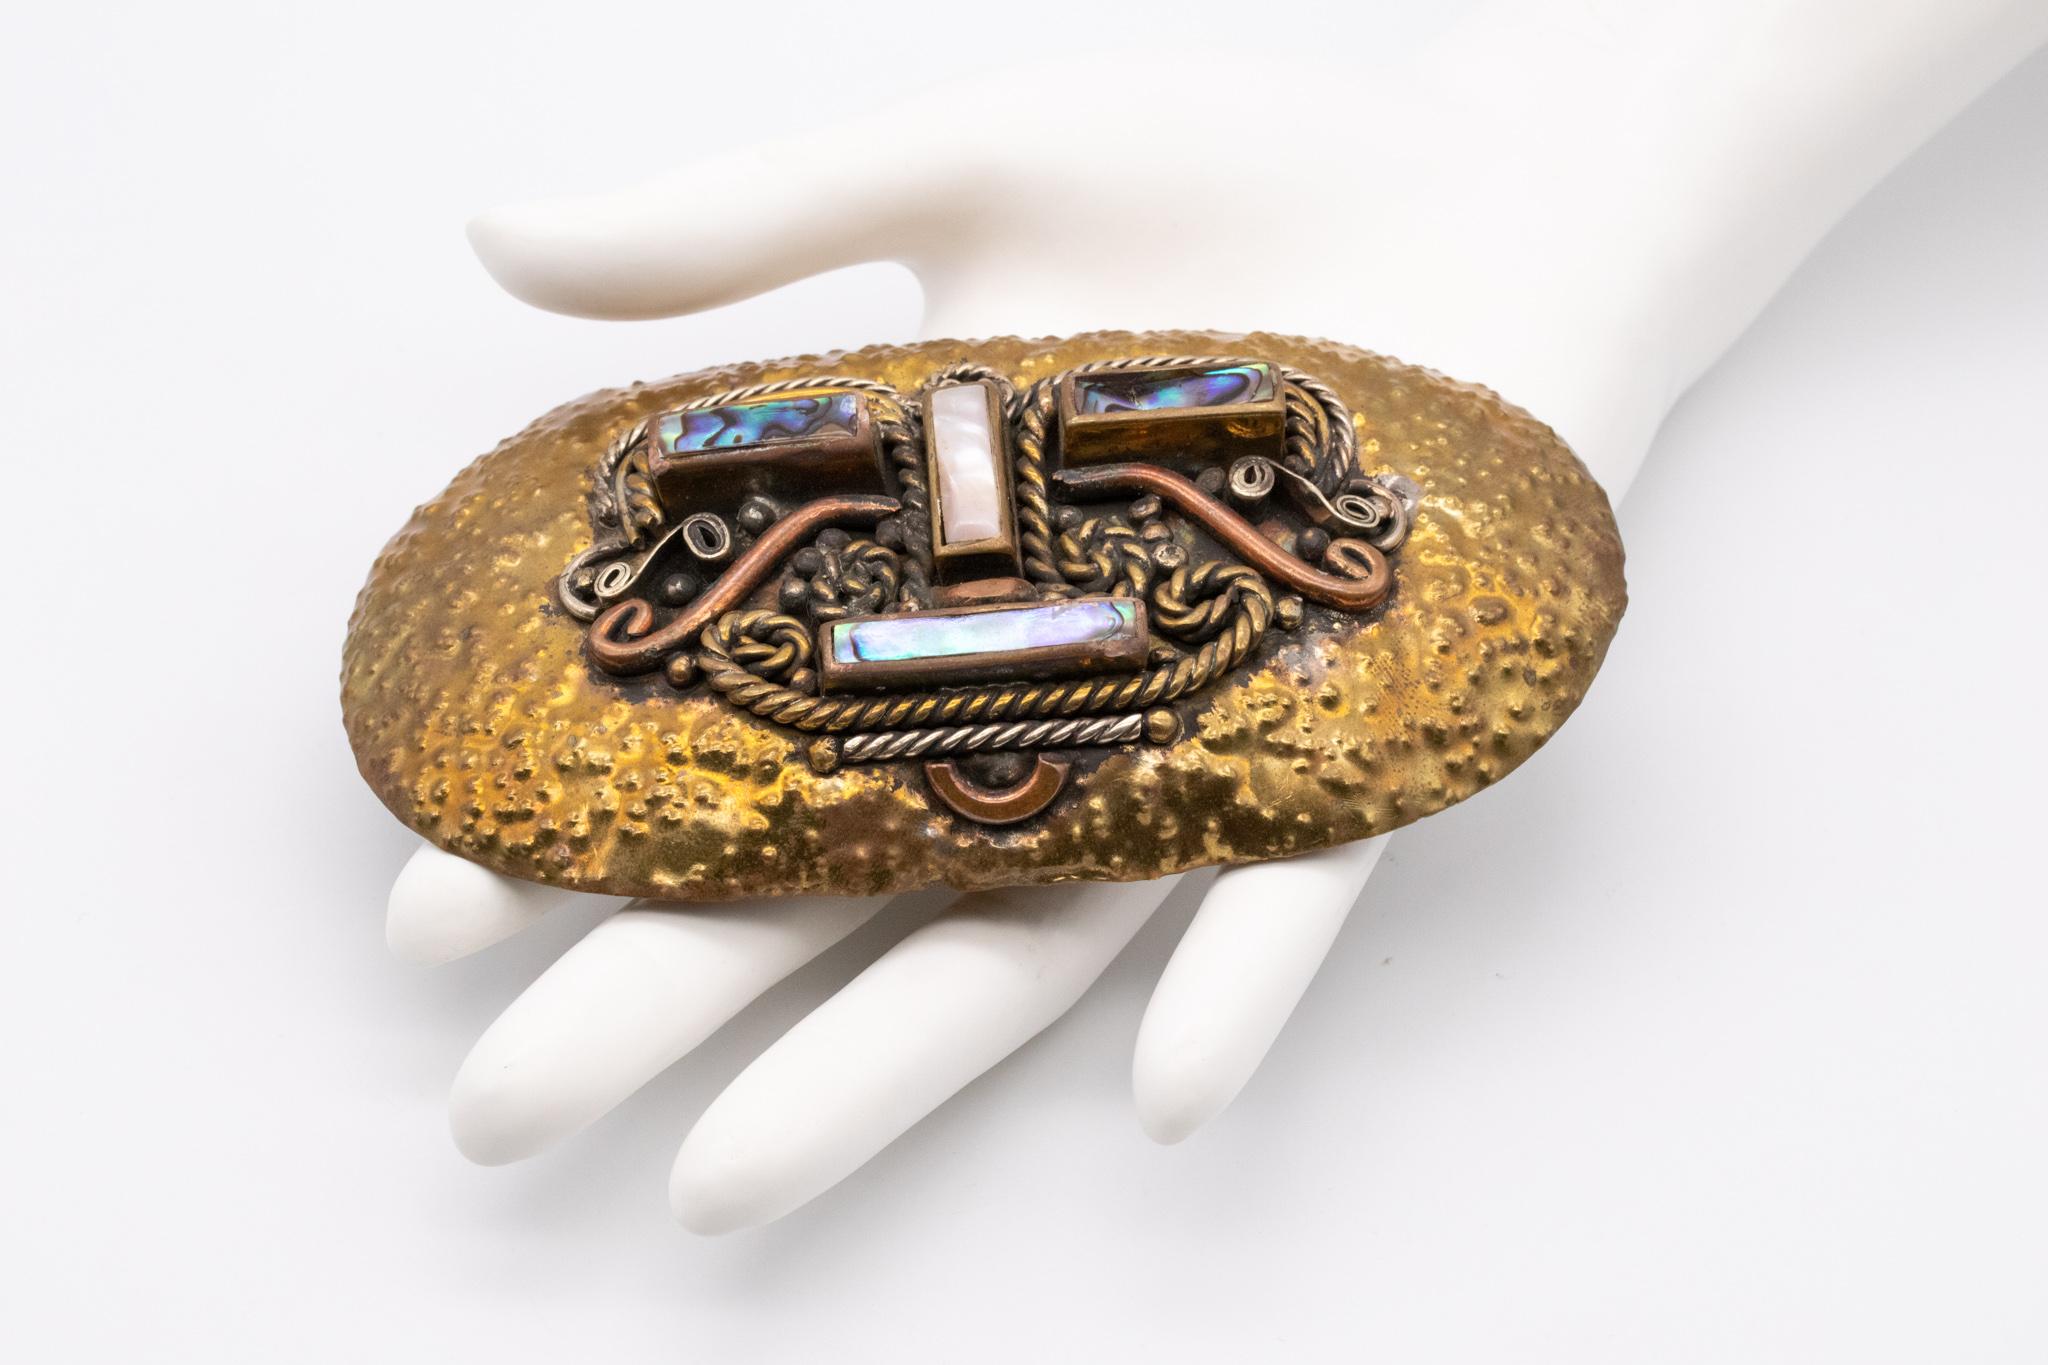 Statement belt-buckle pendant designed by Casa De Maya.

A rare vintage piece, created in Mexico during the mid-century back in the 1950. Crafted at the atelier of Casa De Maya with mixed metals such hammered copper and polished brass. This